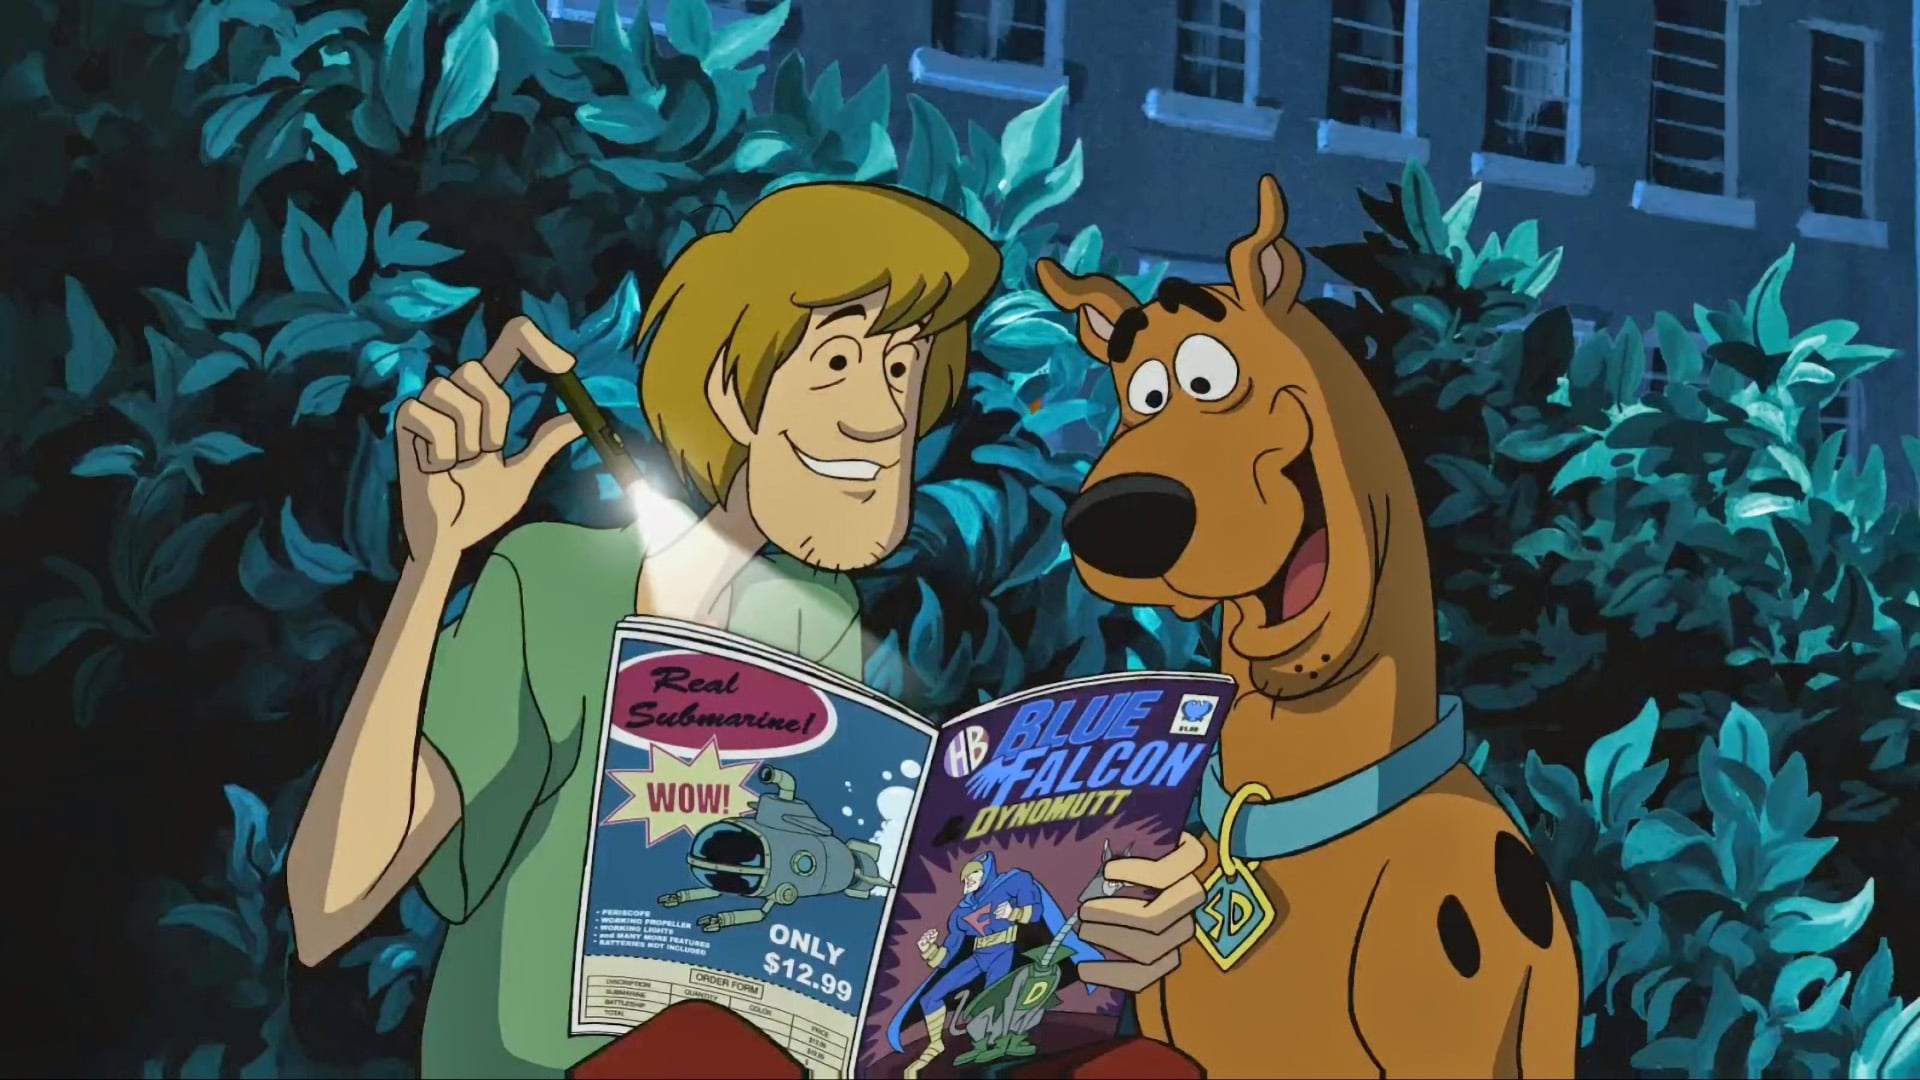 Scooby-Doo! Mask of the Blue Falcon 2013 123movies